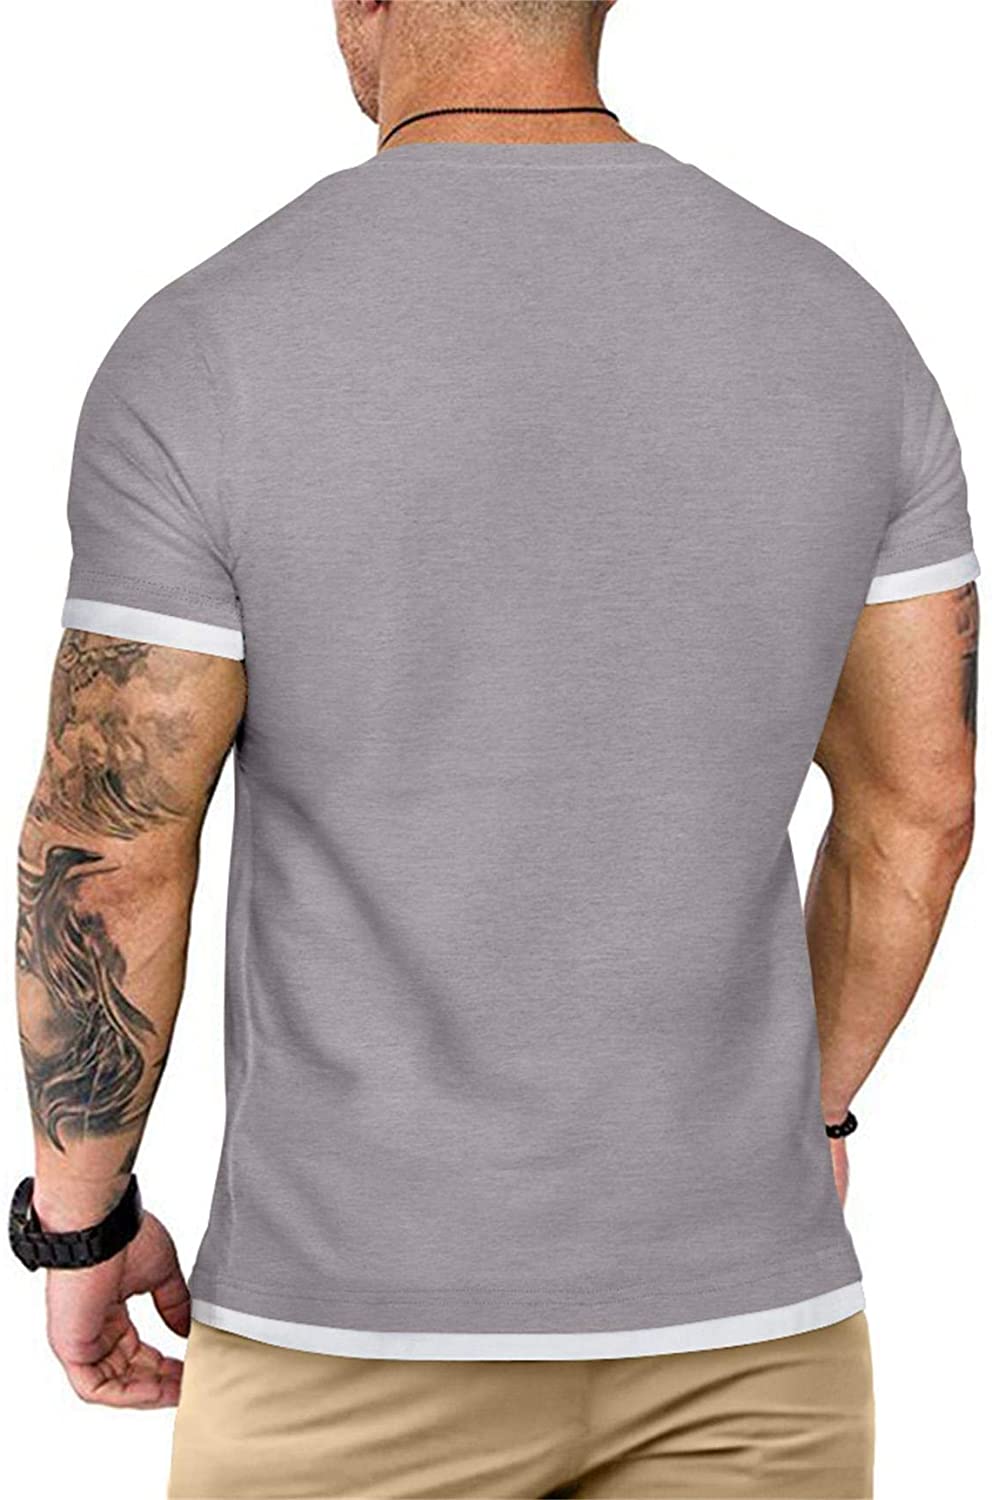 Aiyino Men's S-5XL Short Sleeve Athletic T-Shirt Classic Top Casual Workout Sports Summer Shirts